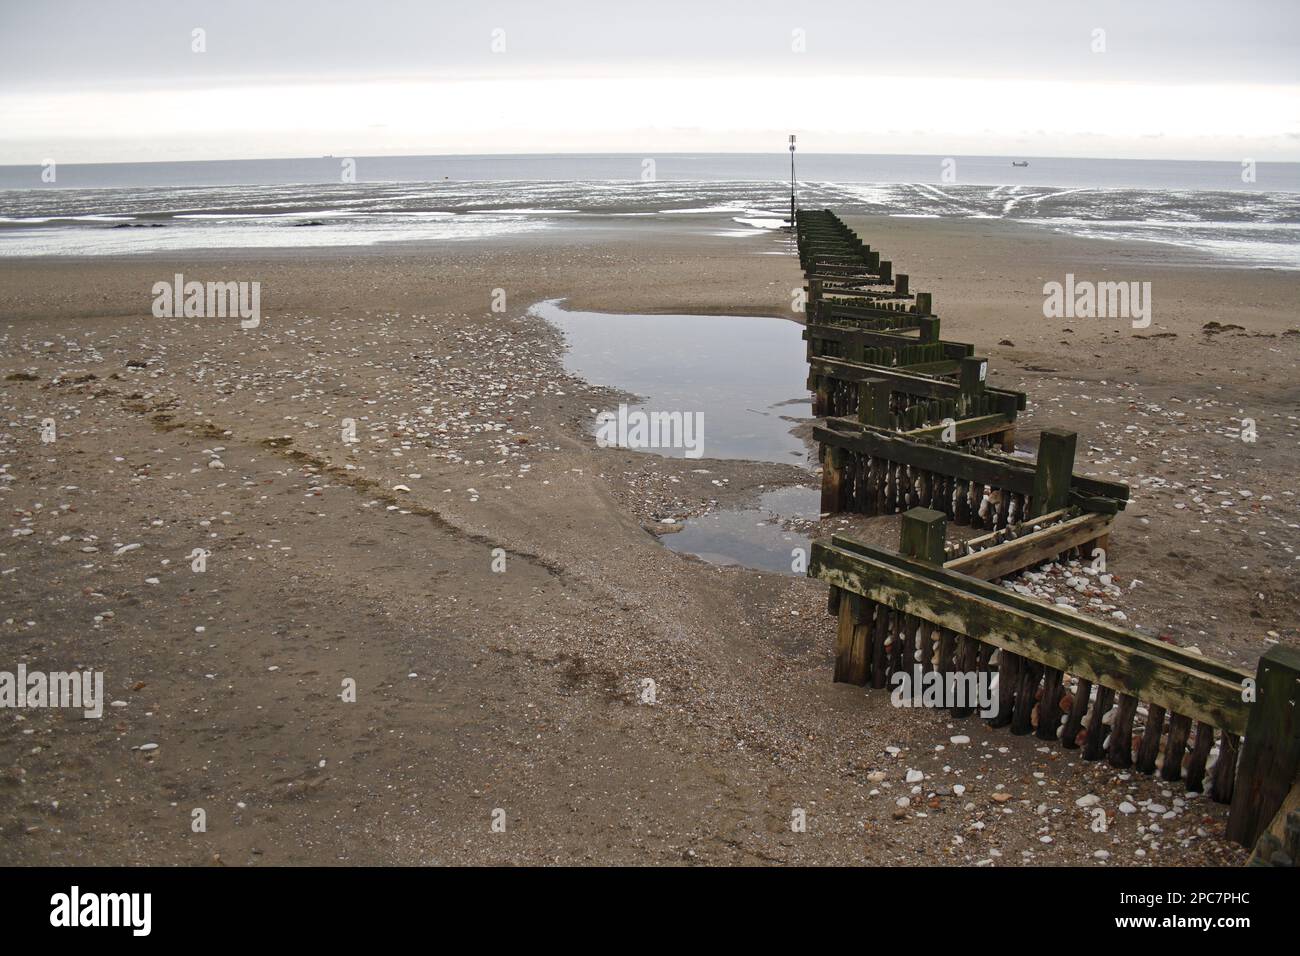 View of beach and groyne at low tide, The Wash, Hunstanton, Norfolk, England, United Kingdom Stock Photo